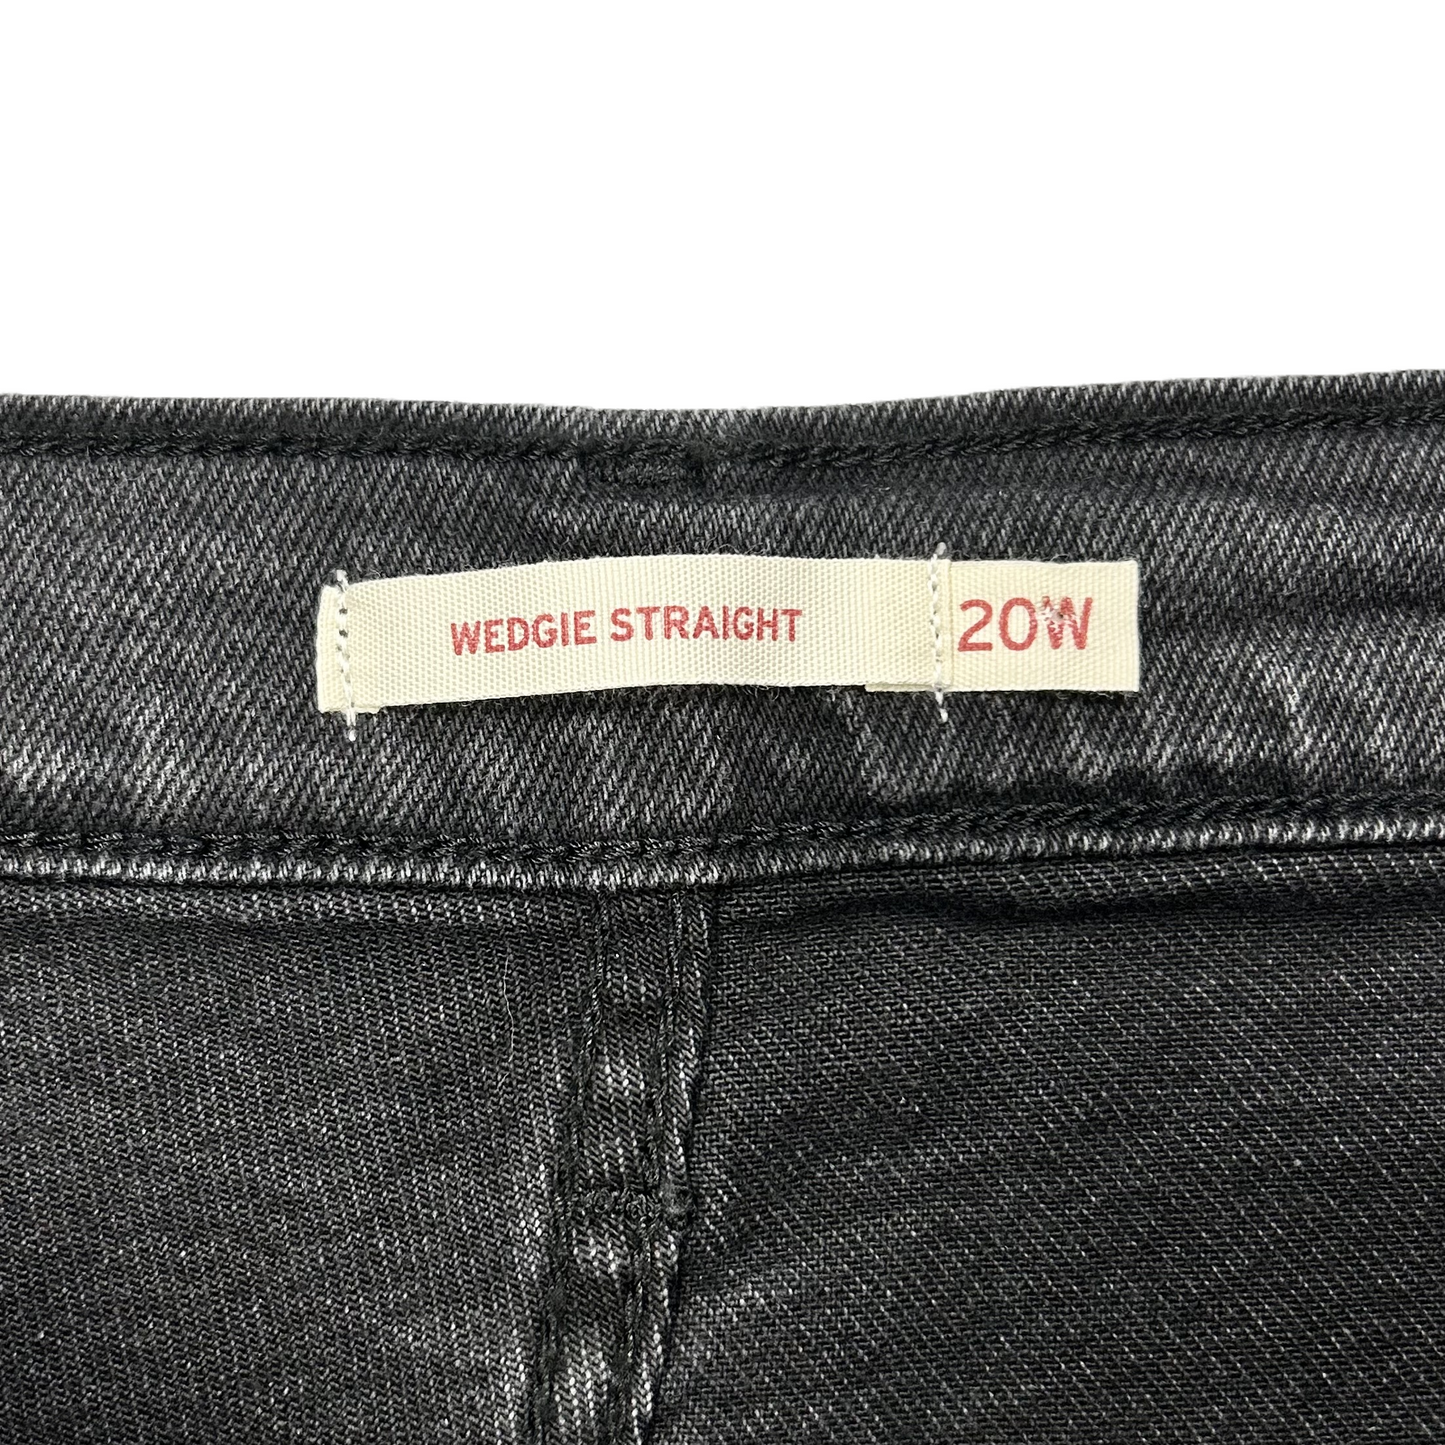 Jeans Straight By Levis  Size: 20w